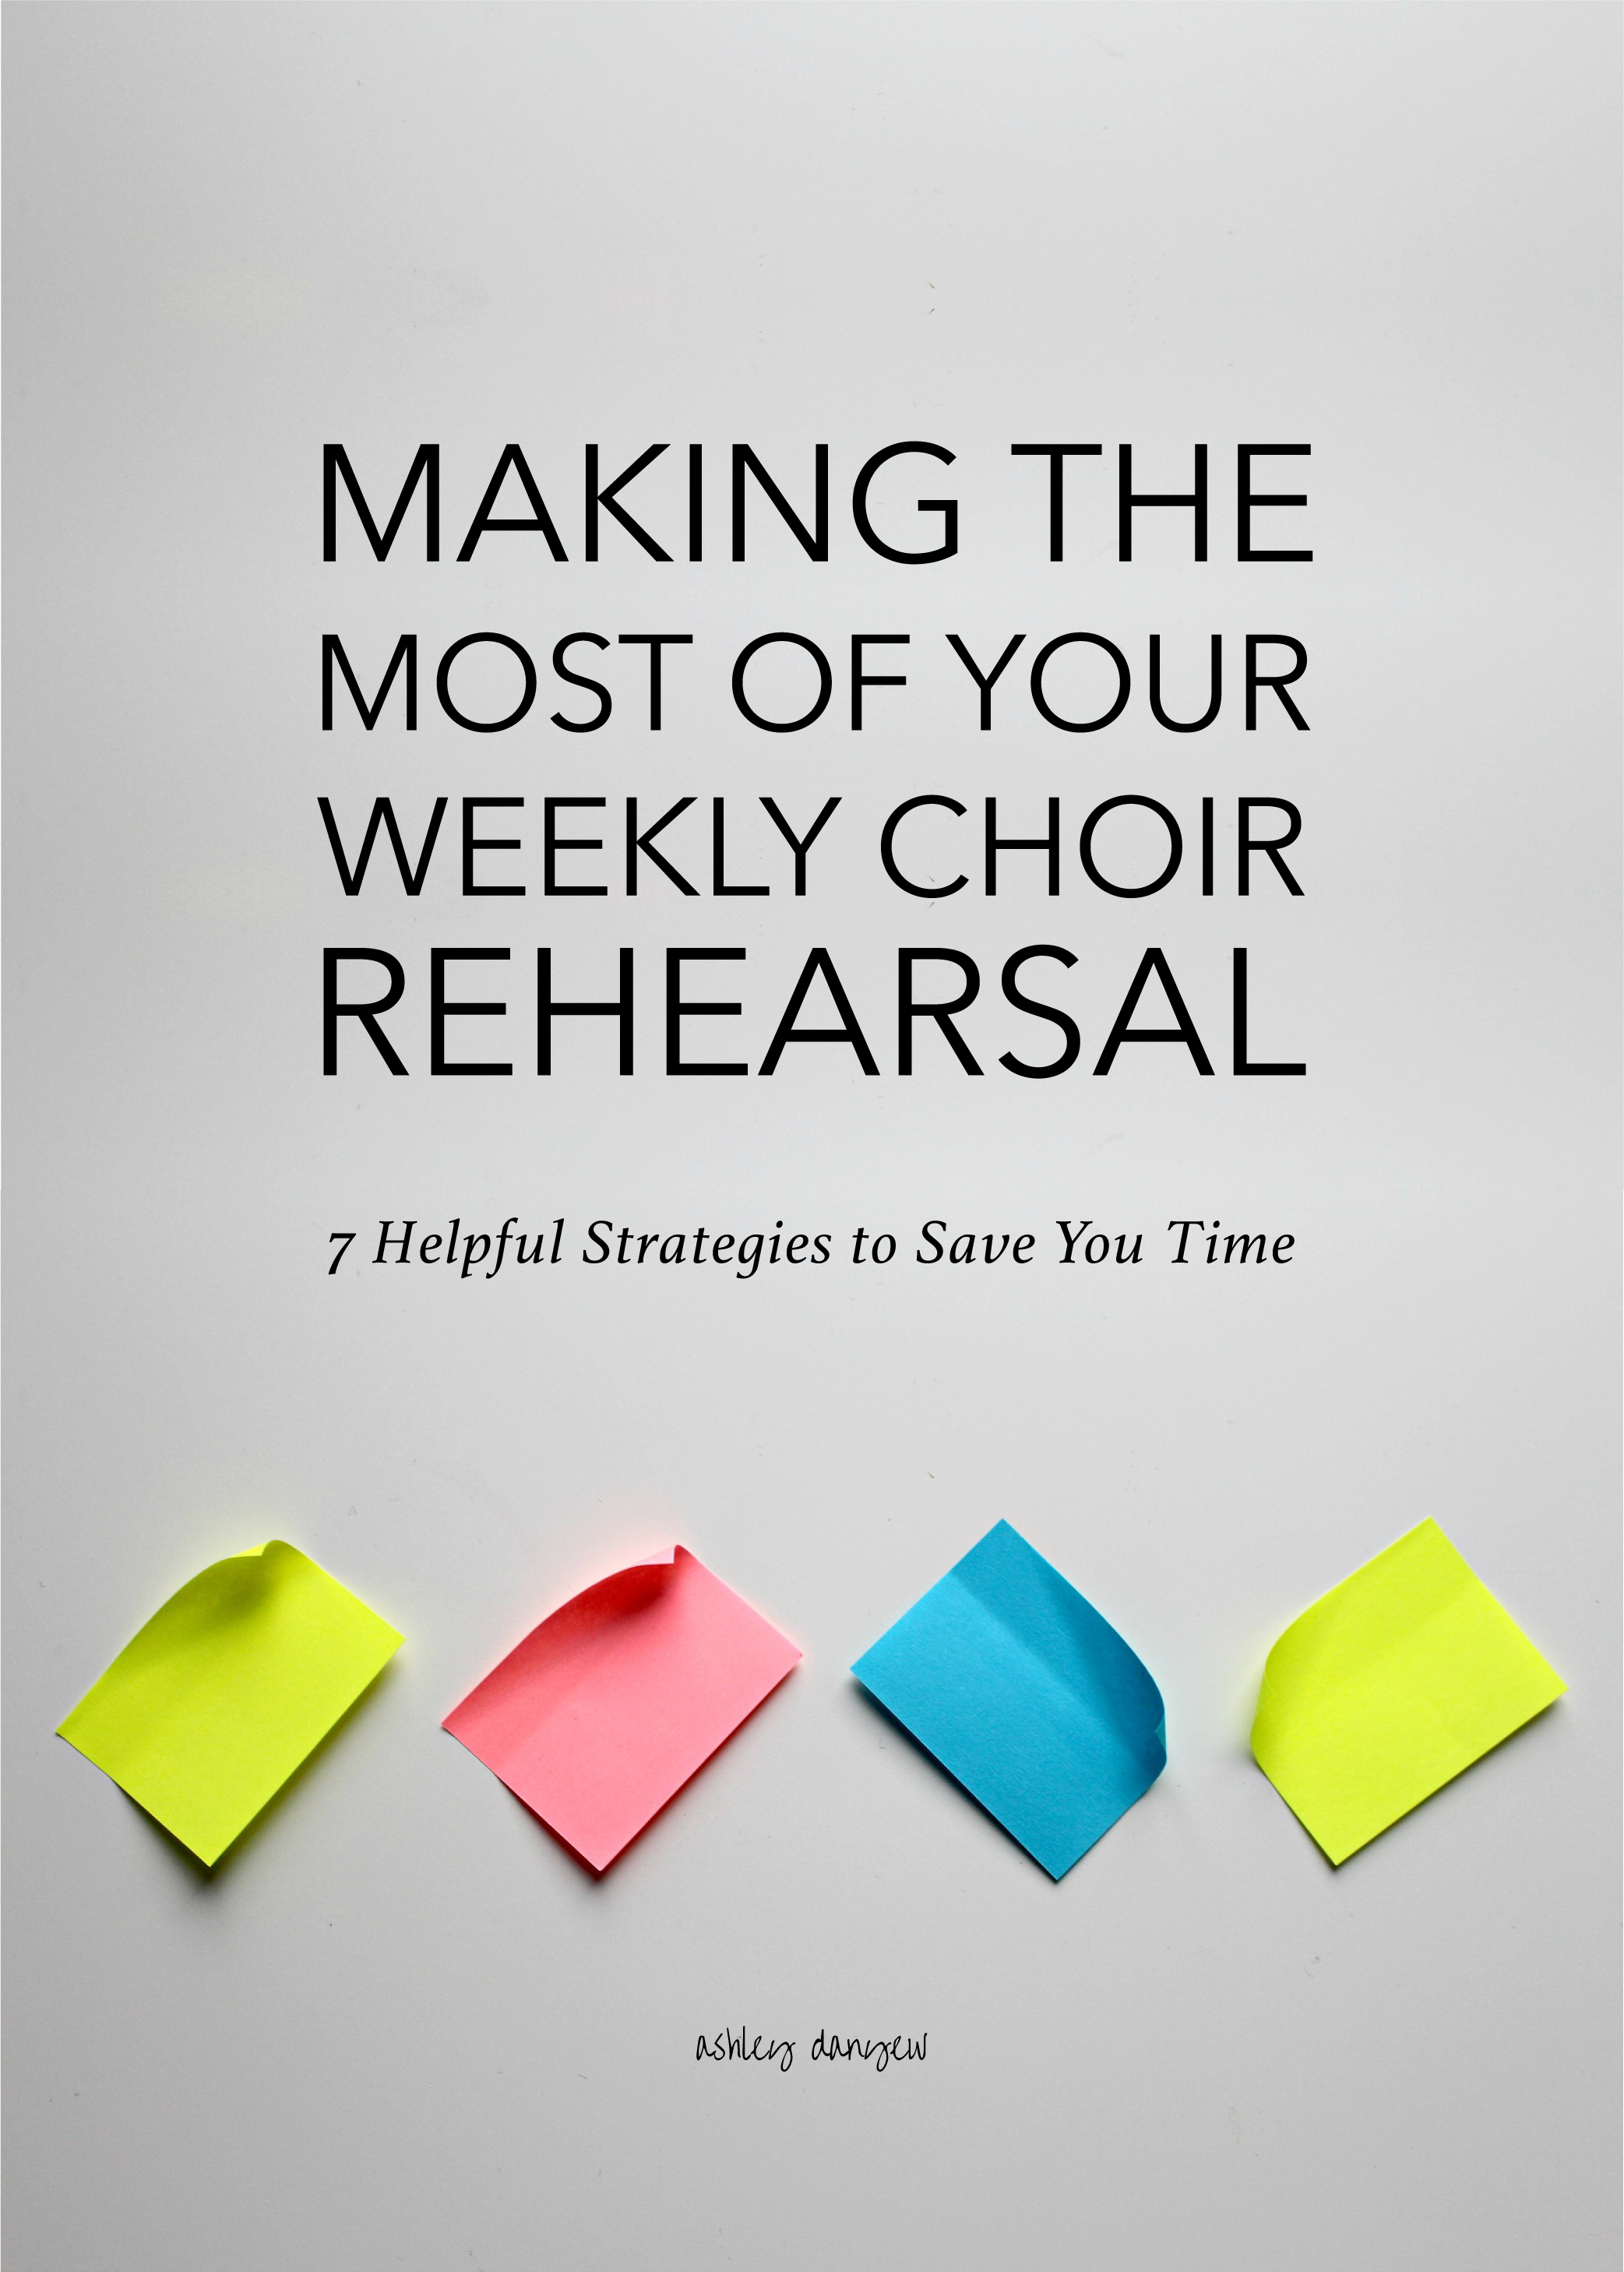 Making the Most of Your Weekly Rehearsal: 7 Helpful Strategies to Save You Time